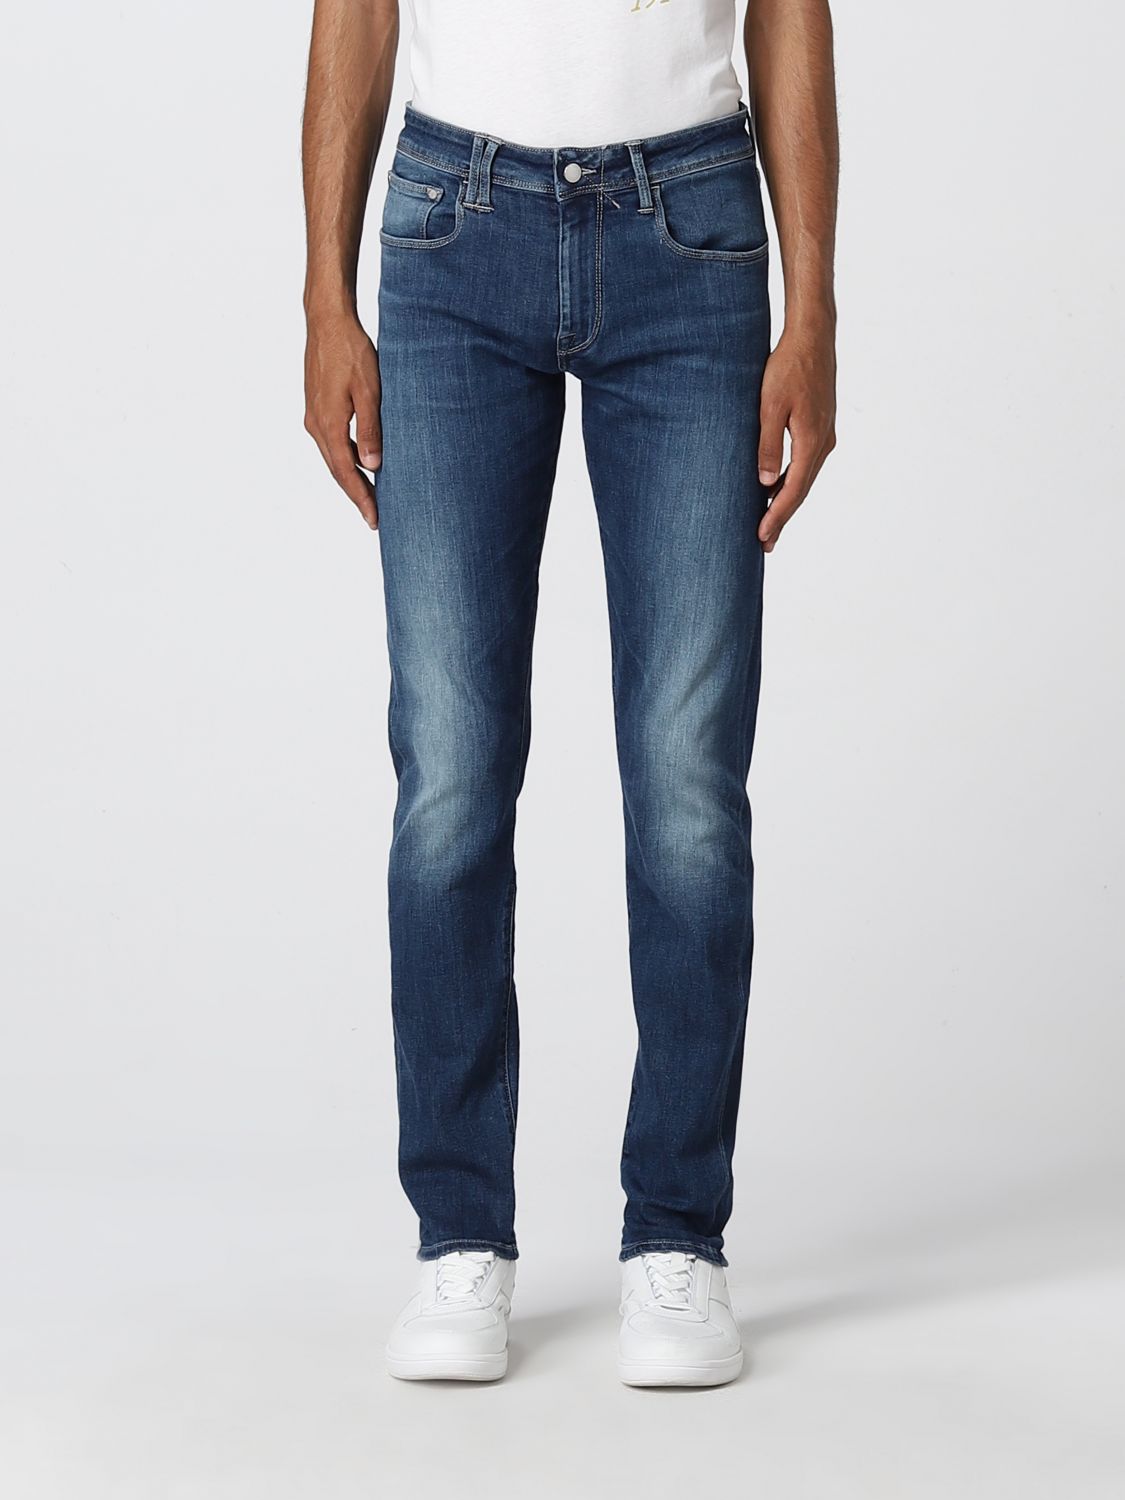 Cycle Jeans In Washed Denim | ModeSens